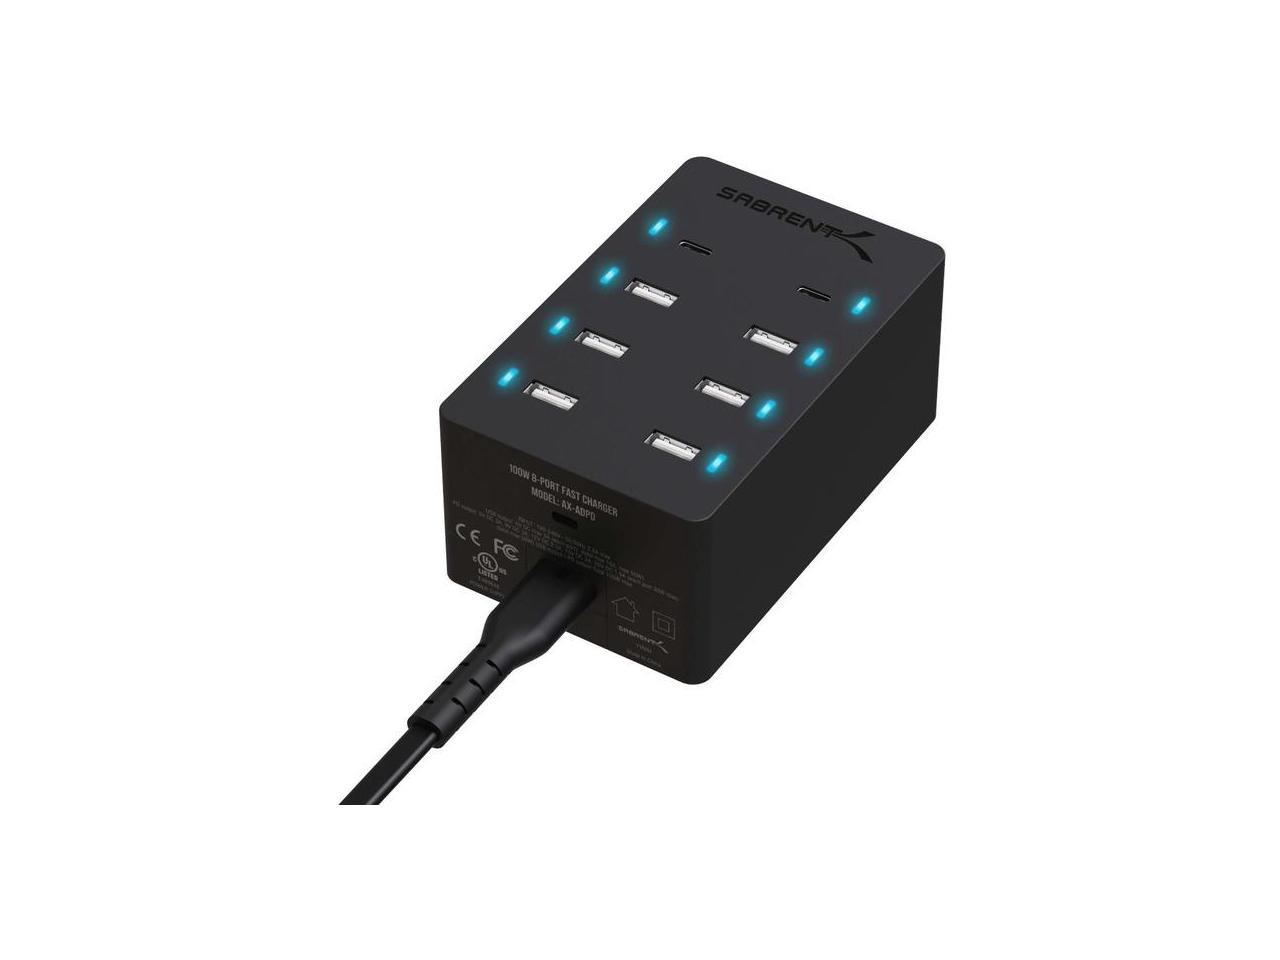 Sabrent 100 Watt 8-Port Family-Sized USB Rapid Charger [UL Certified ] -  Includes 2 PD (Power Delivery) Ports (AX-ADPD)